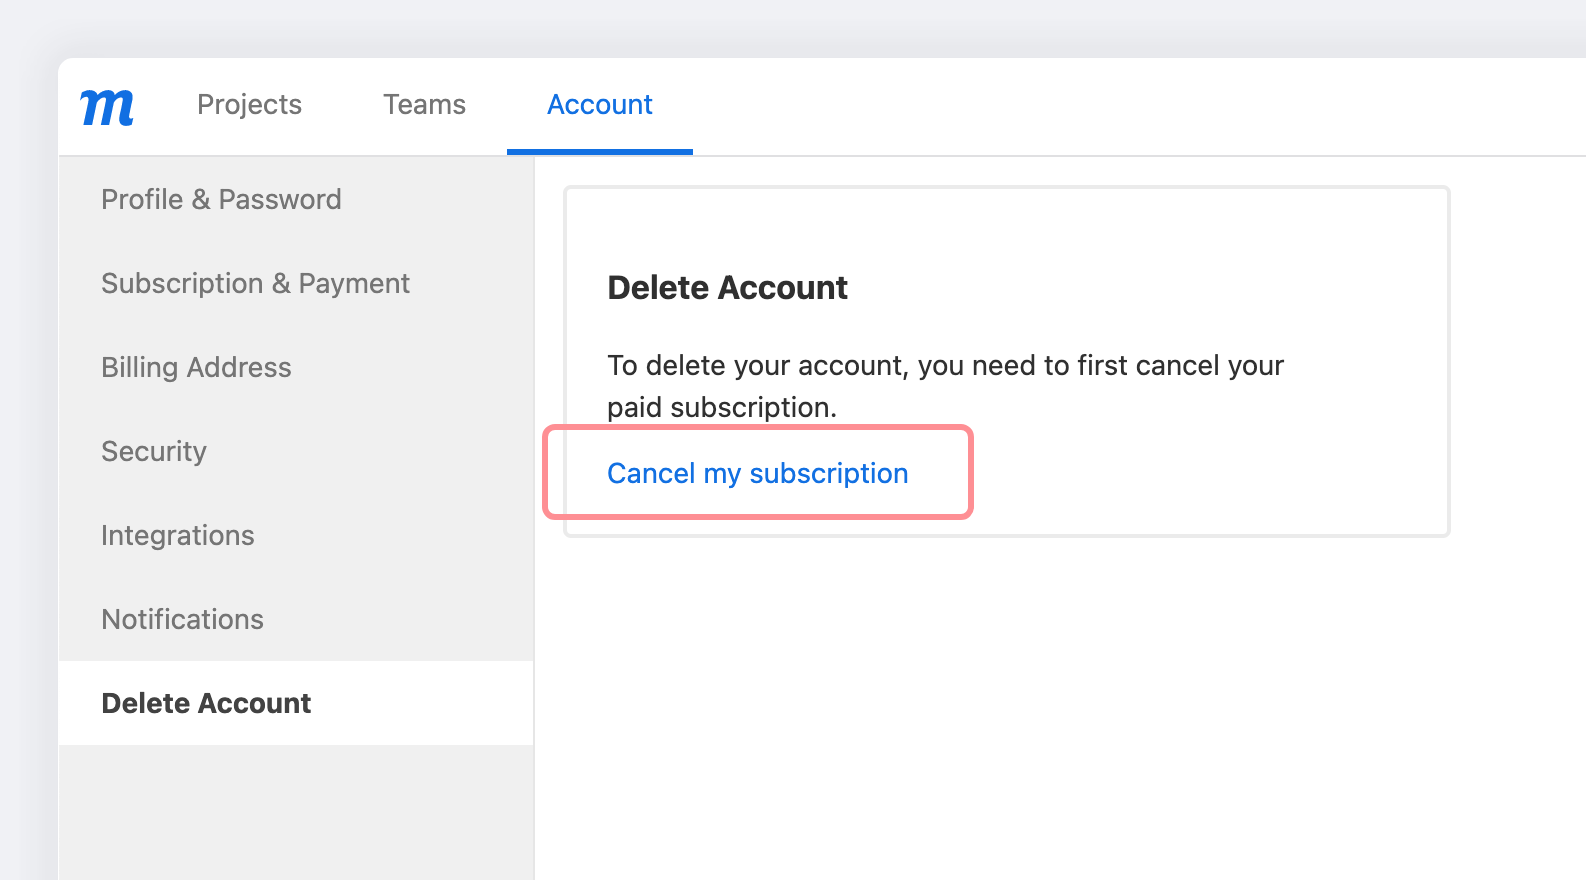 05._Account_-_Cancel_Subscription_before_Deleting.png